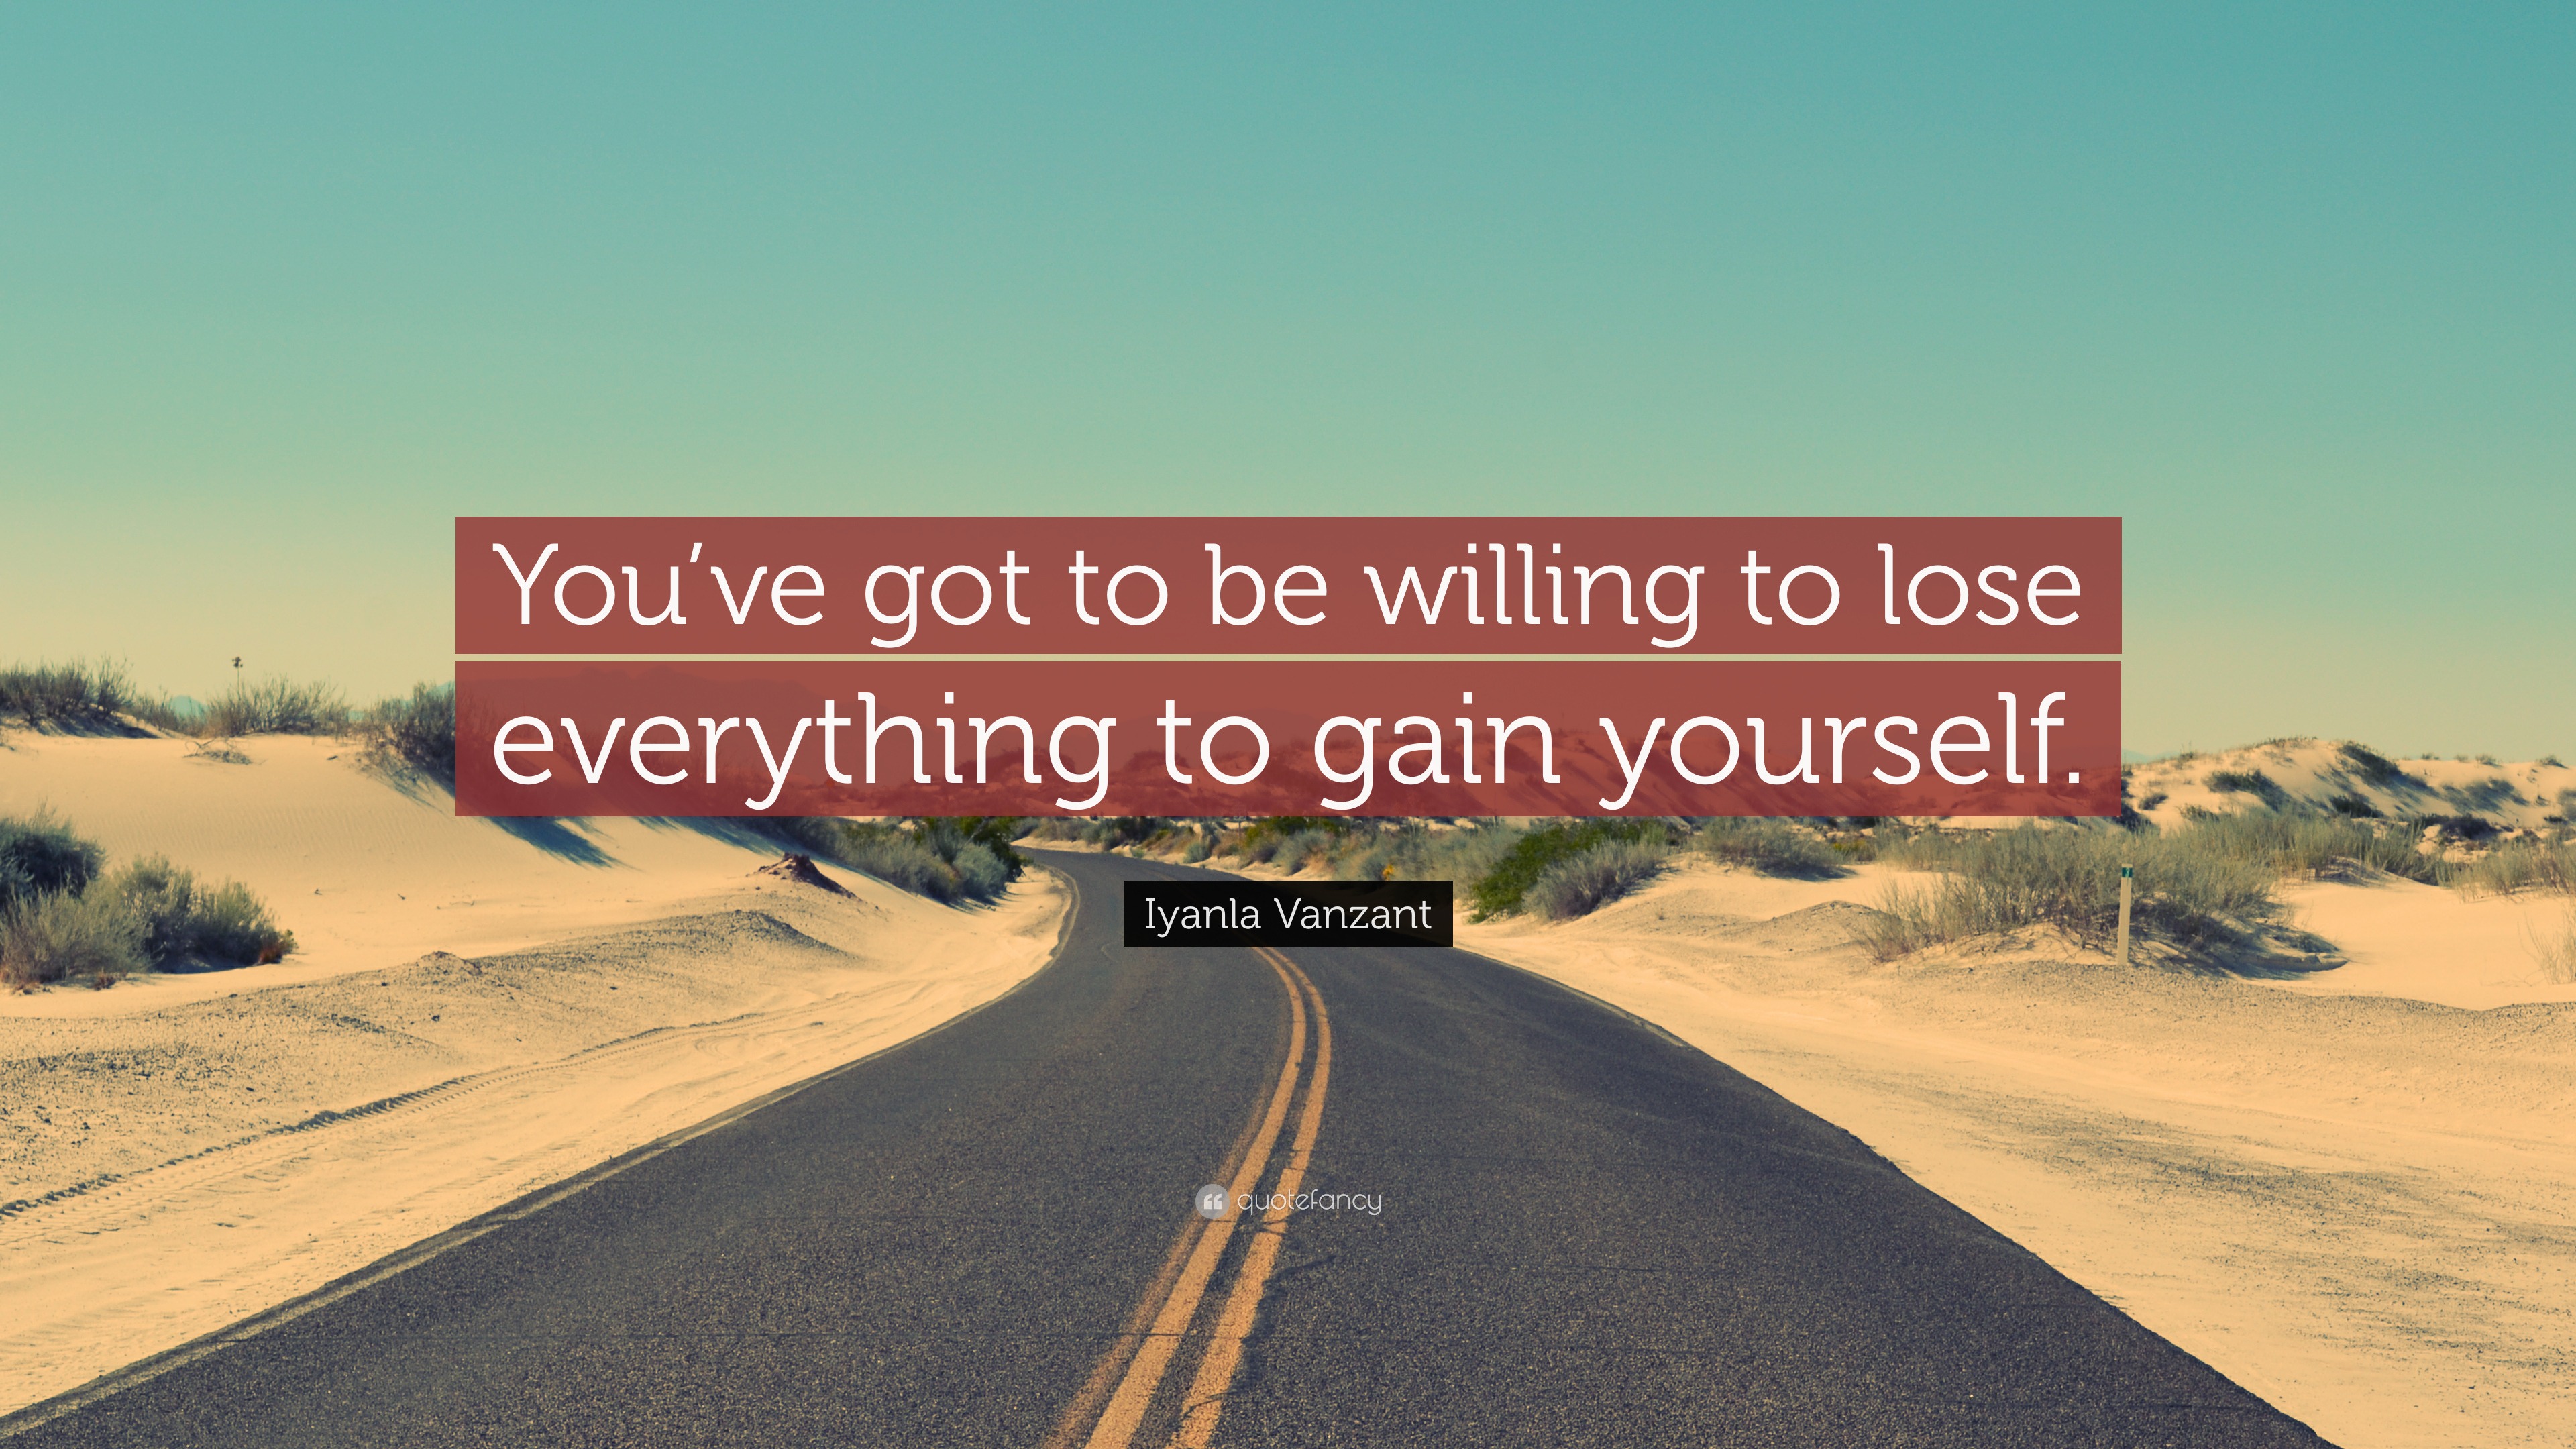 Iyanla Vanzant Quote: “You’ve got to be willing to lose everything to ...